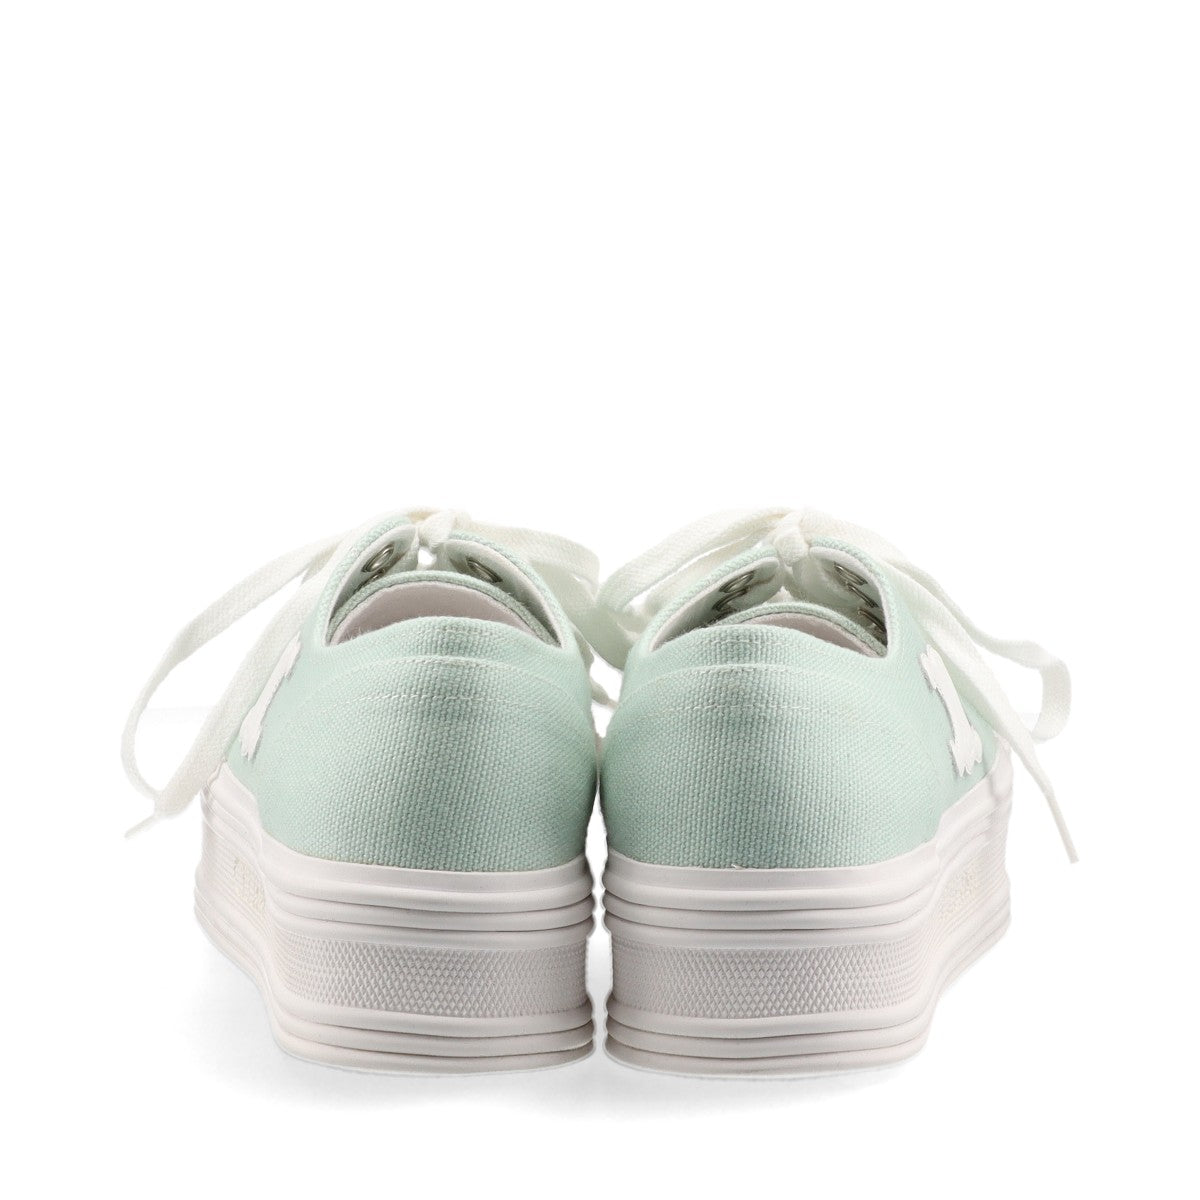 Celine  Jeanne canvas Sneakers 35 Ladies' Light Green Trion logo LK2025 Comes with box